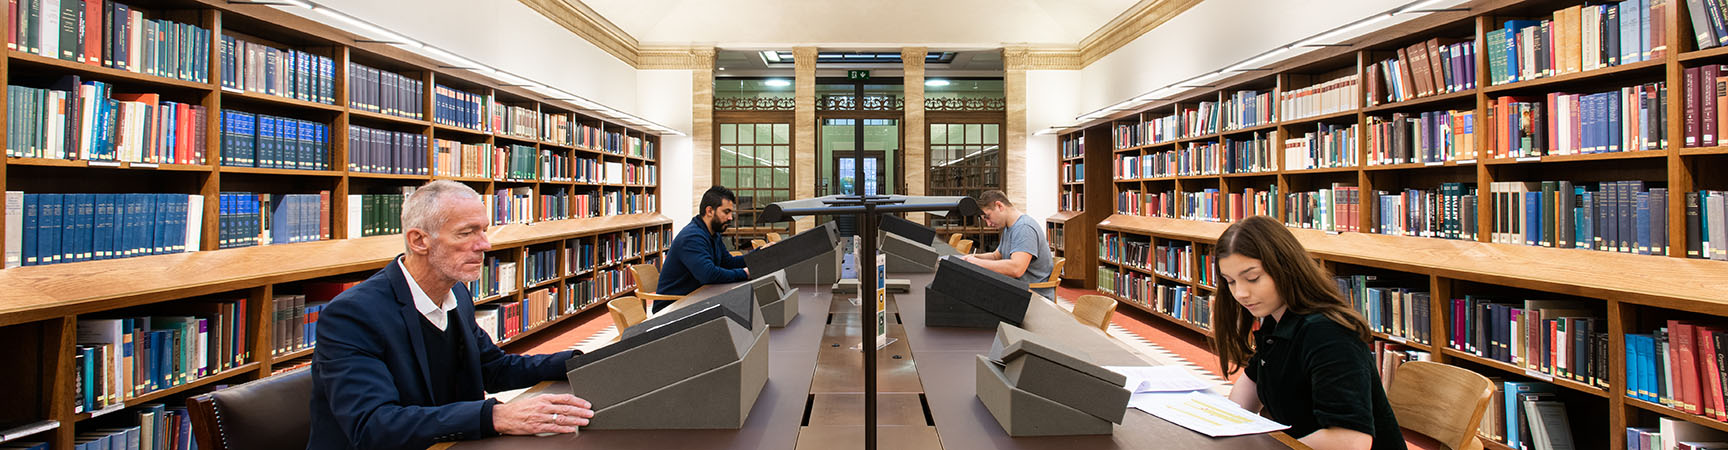 Two readers sit opposite each other each consulting special collections material - bookshelves run down the walls on either side of the room